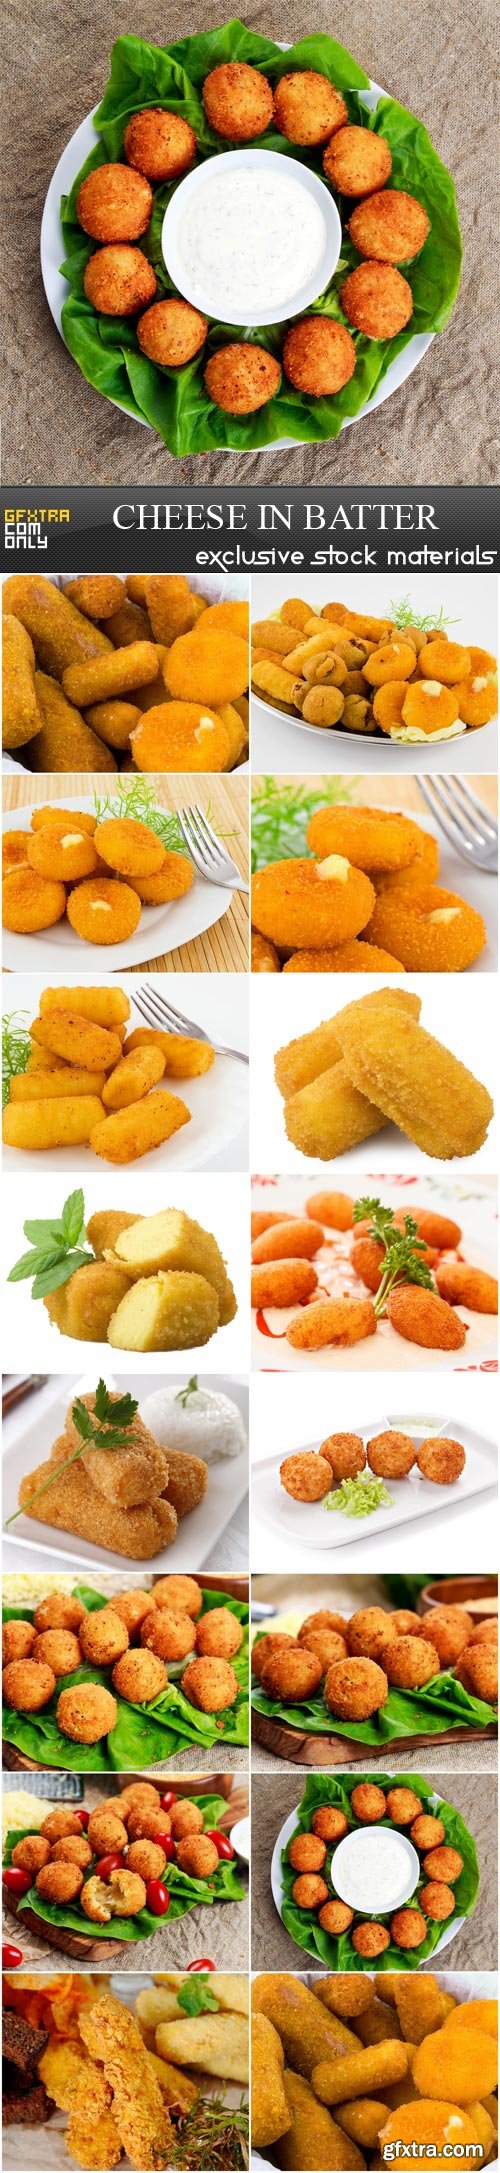 Cheese in batter, 15 UHQ JPEG